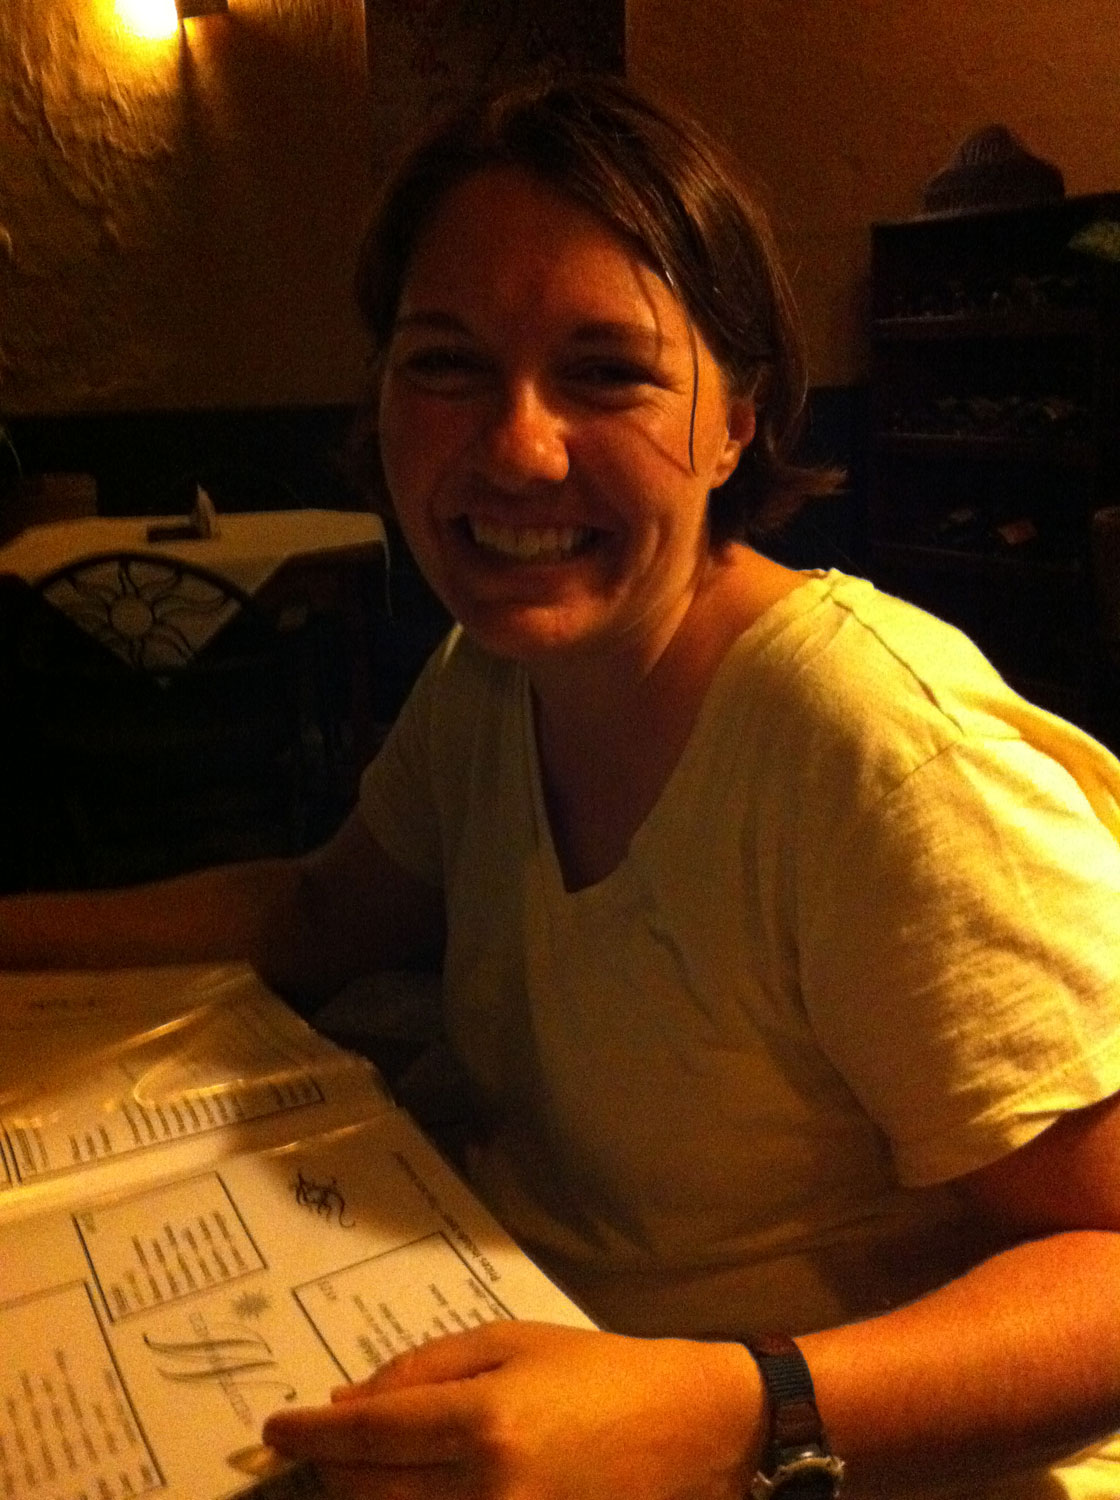 After long day of meetings, it was great to relax with Kristine on a date at Meditarenio